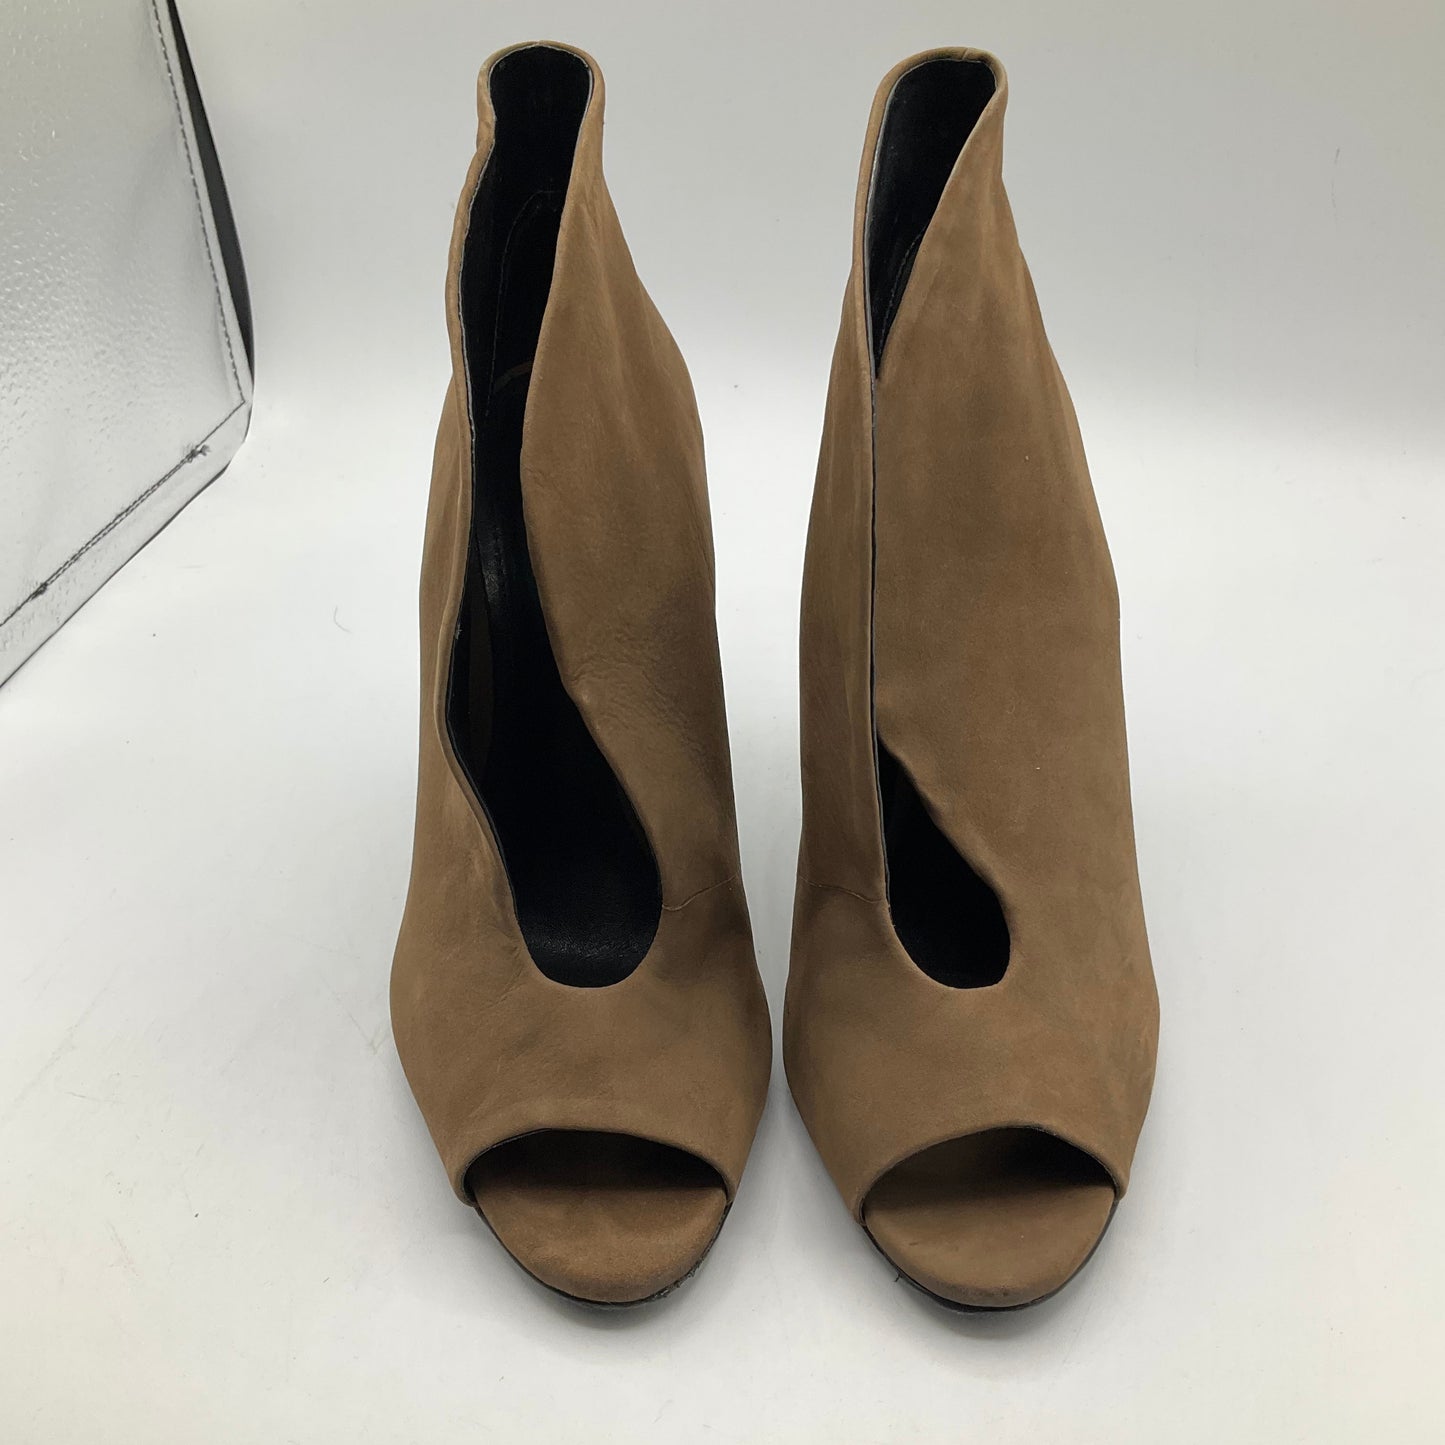 Brown Shoes Heels Stiletto Cma, Size 7